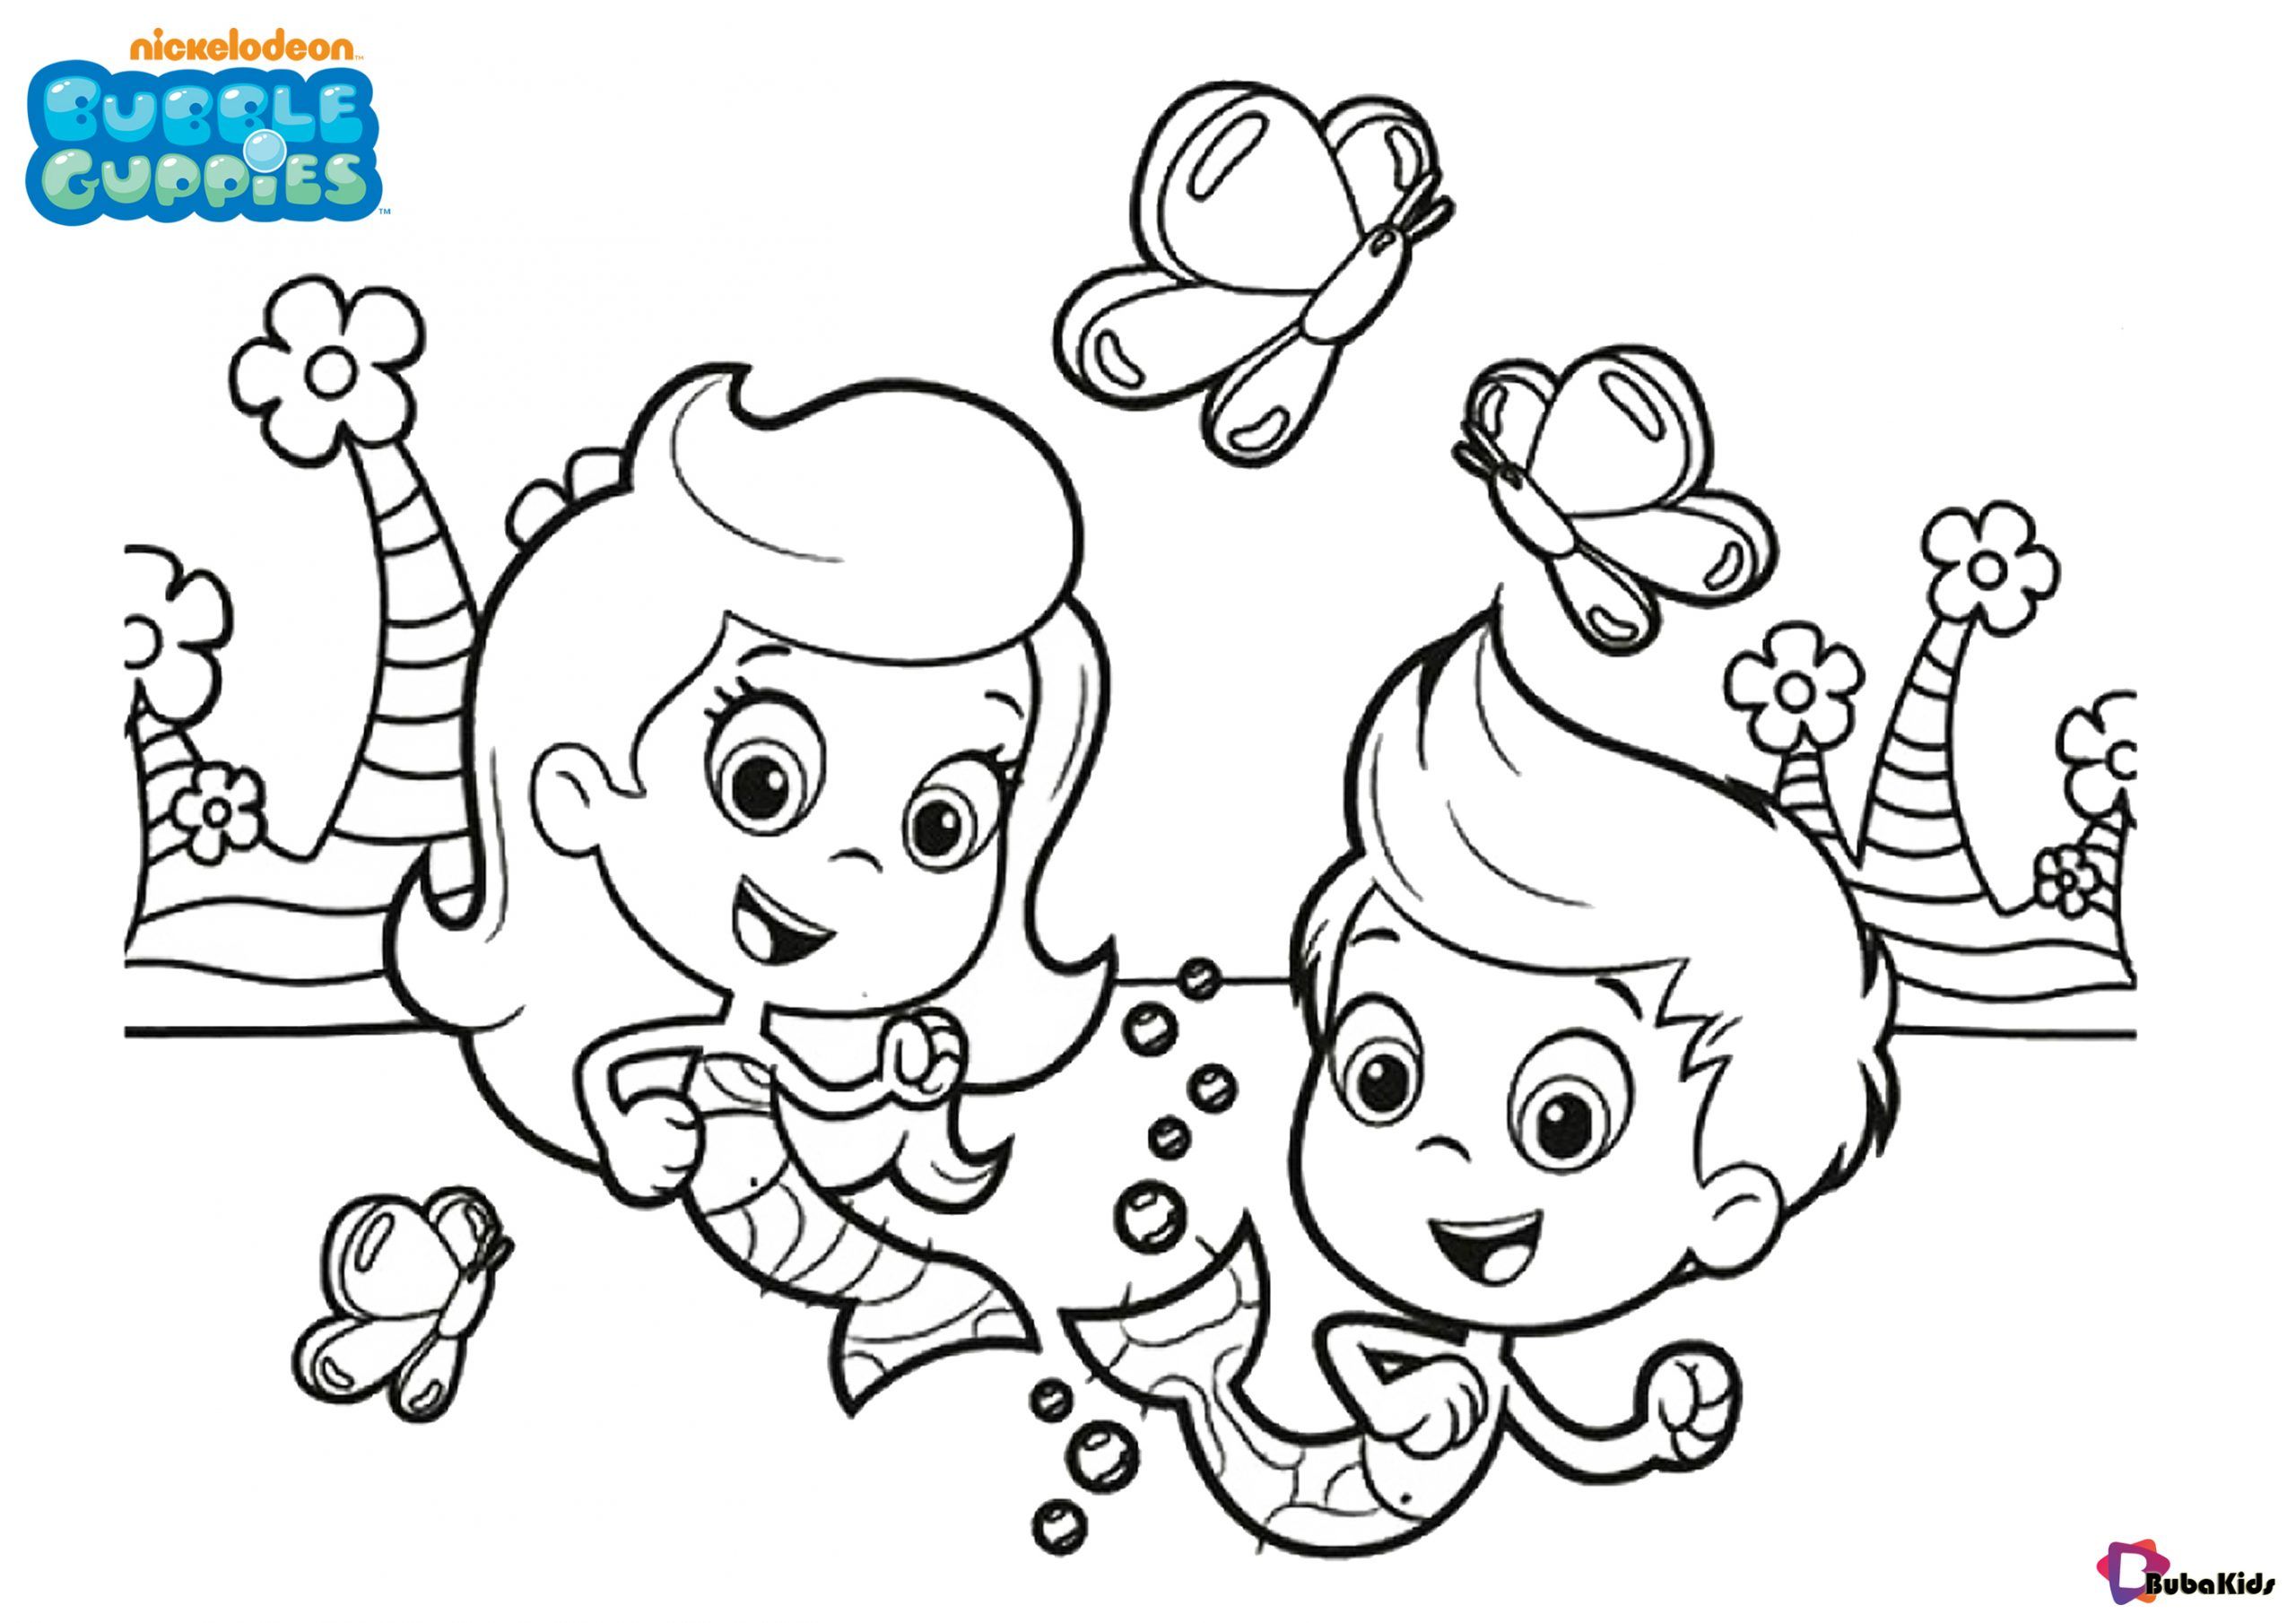 Easy and printable bubble guppies colouring pages for kids collection of cartoon â bubble guppies coloring pages cartoon coloring pages princess coloring pages